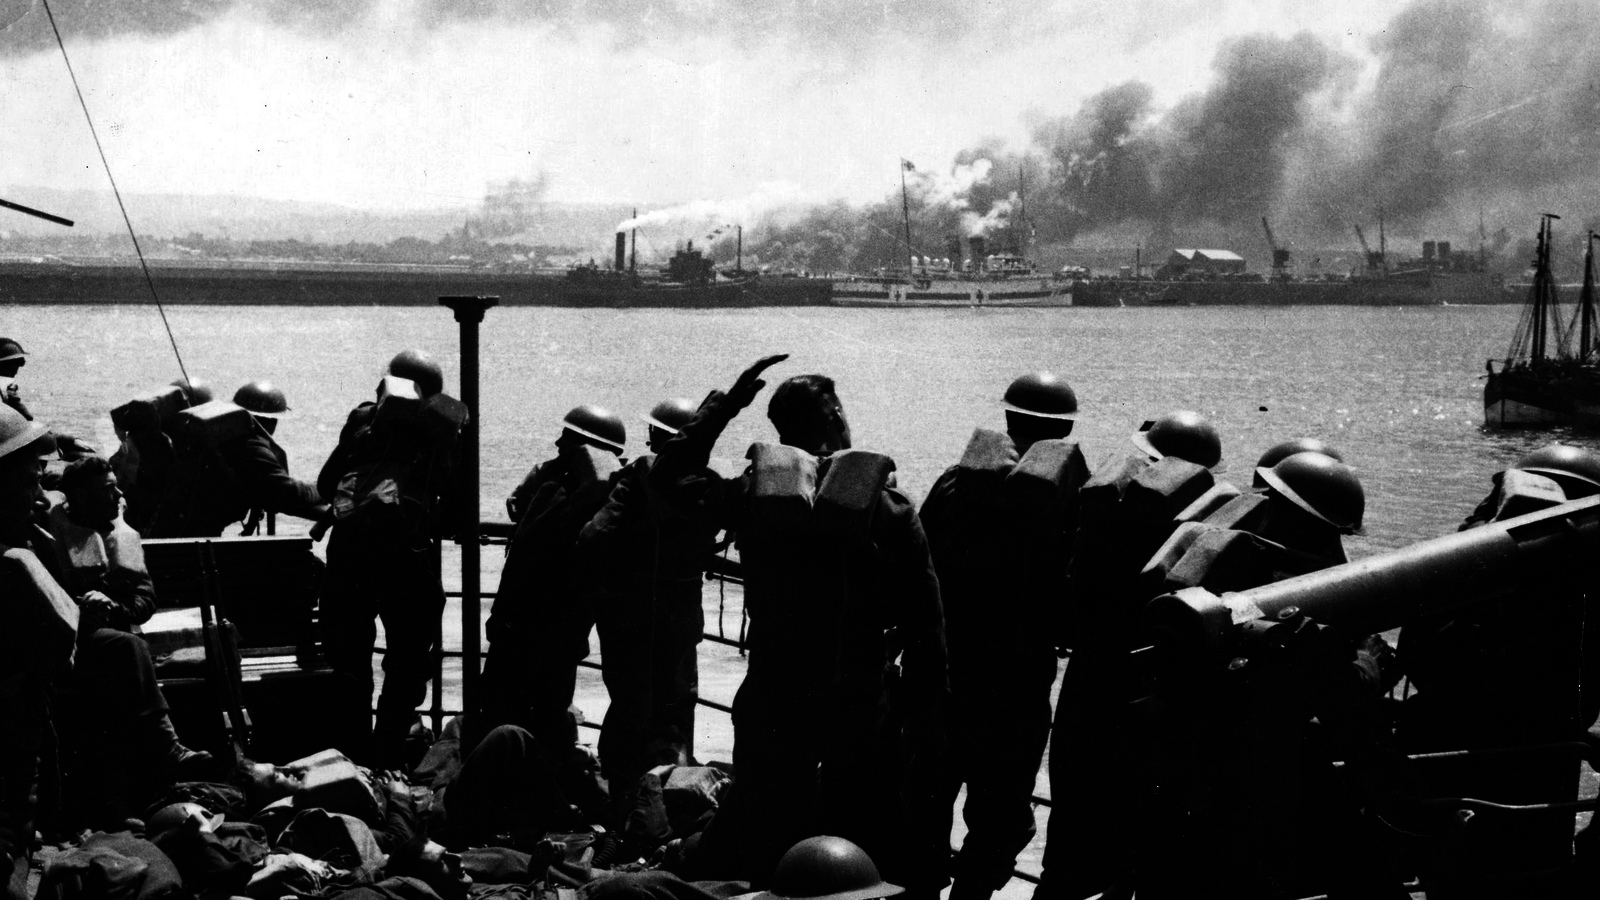 Fortune’s fickle wheel: lessons from Dunkirk